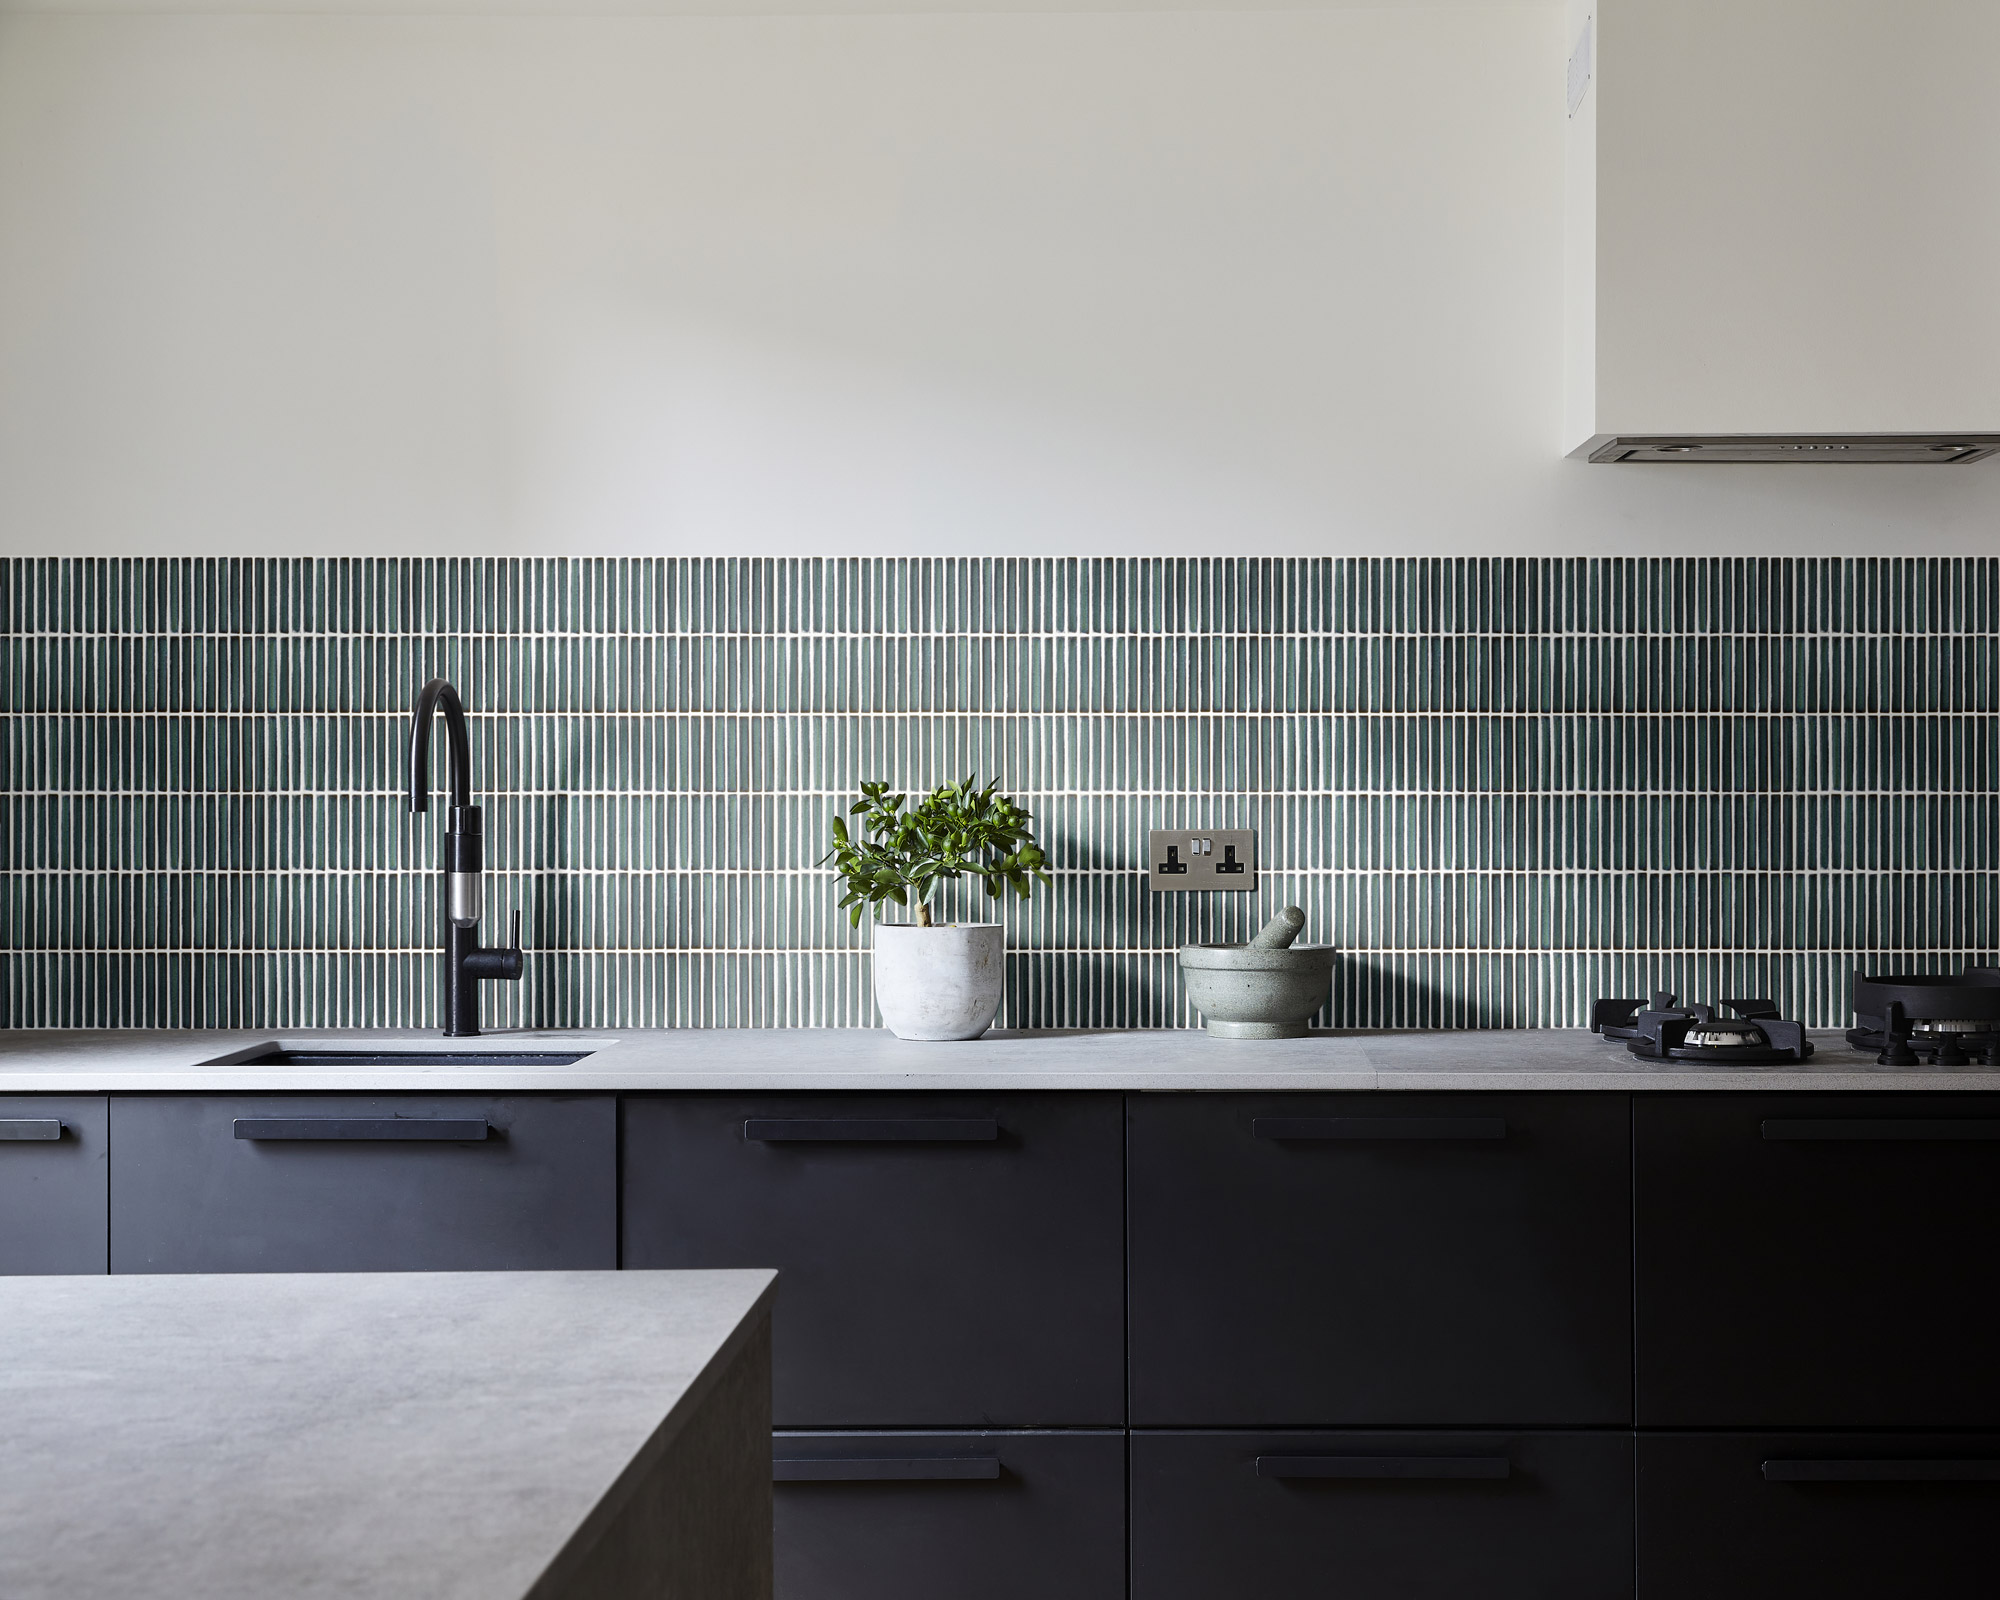 Kitchen tile costs: Which type is best for my budget? | Homes & Gardens